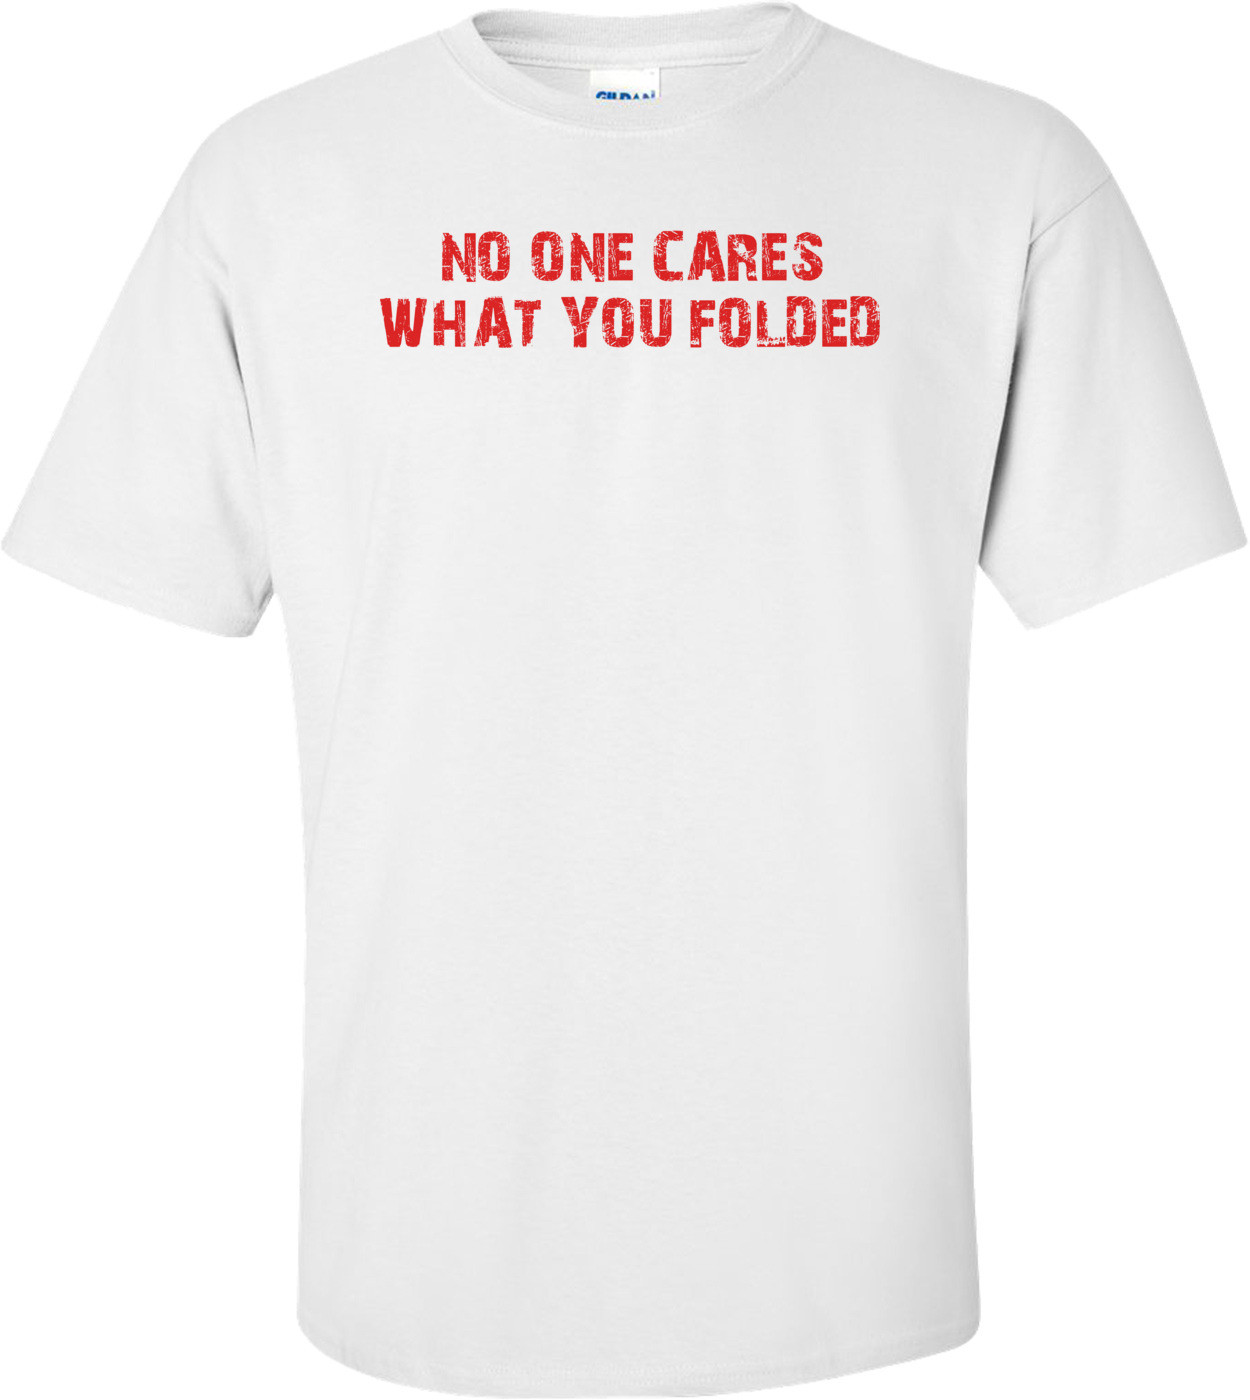 NO ONE CARES WHAT YOU FOLDED Funny Poker T-Shirt